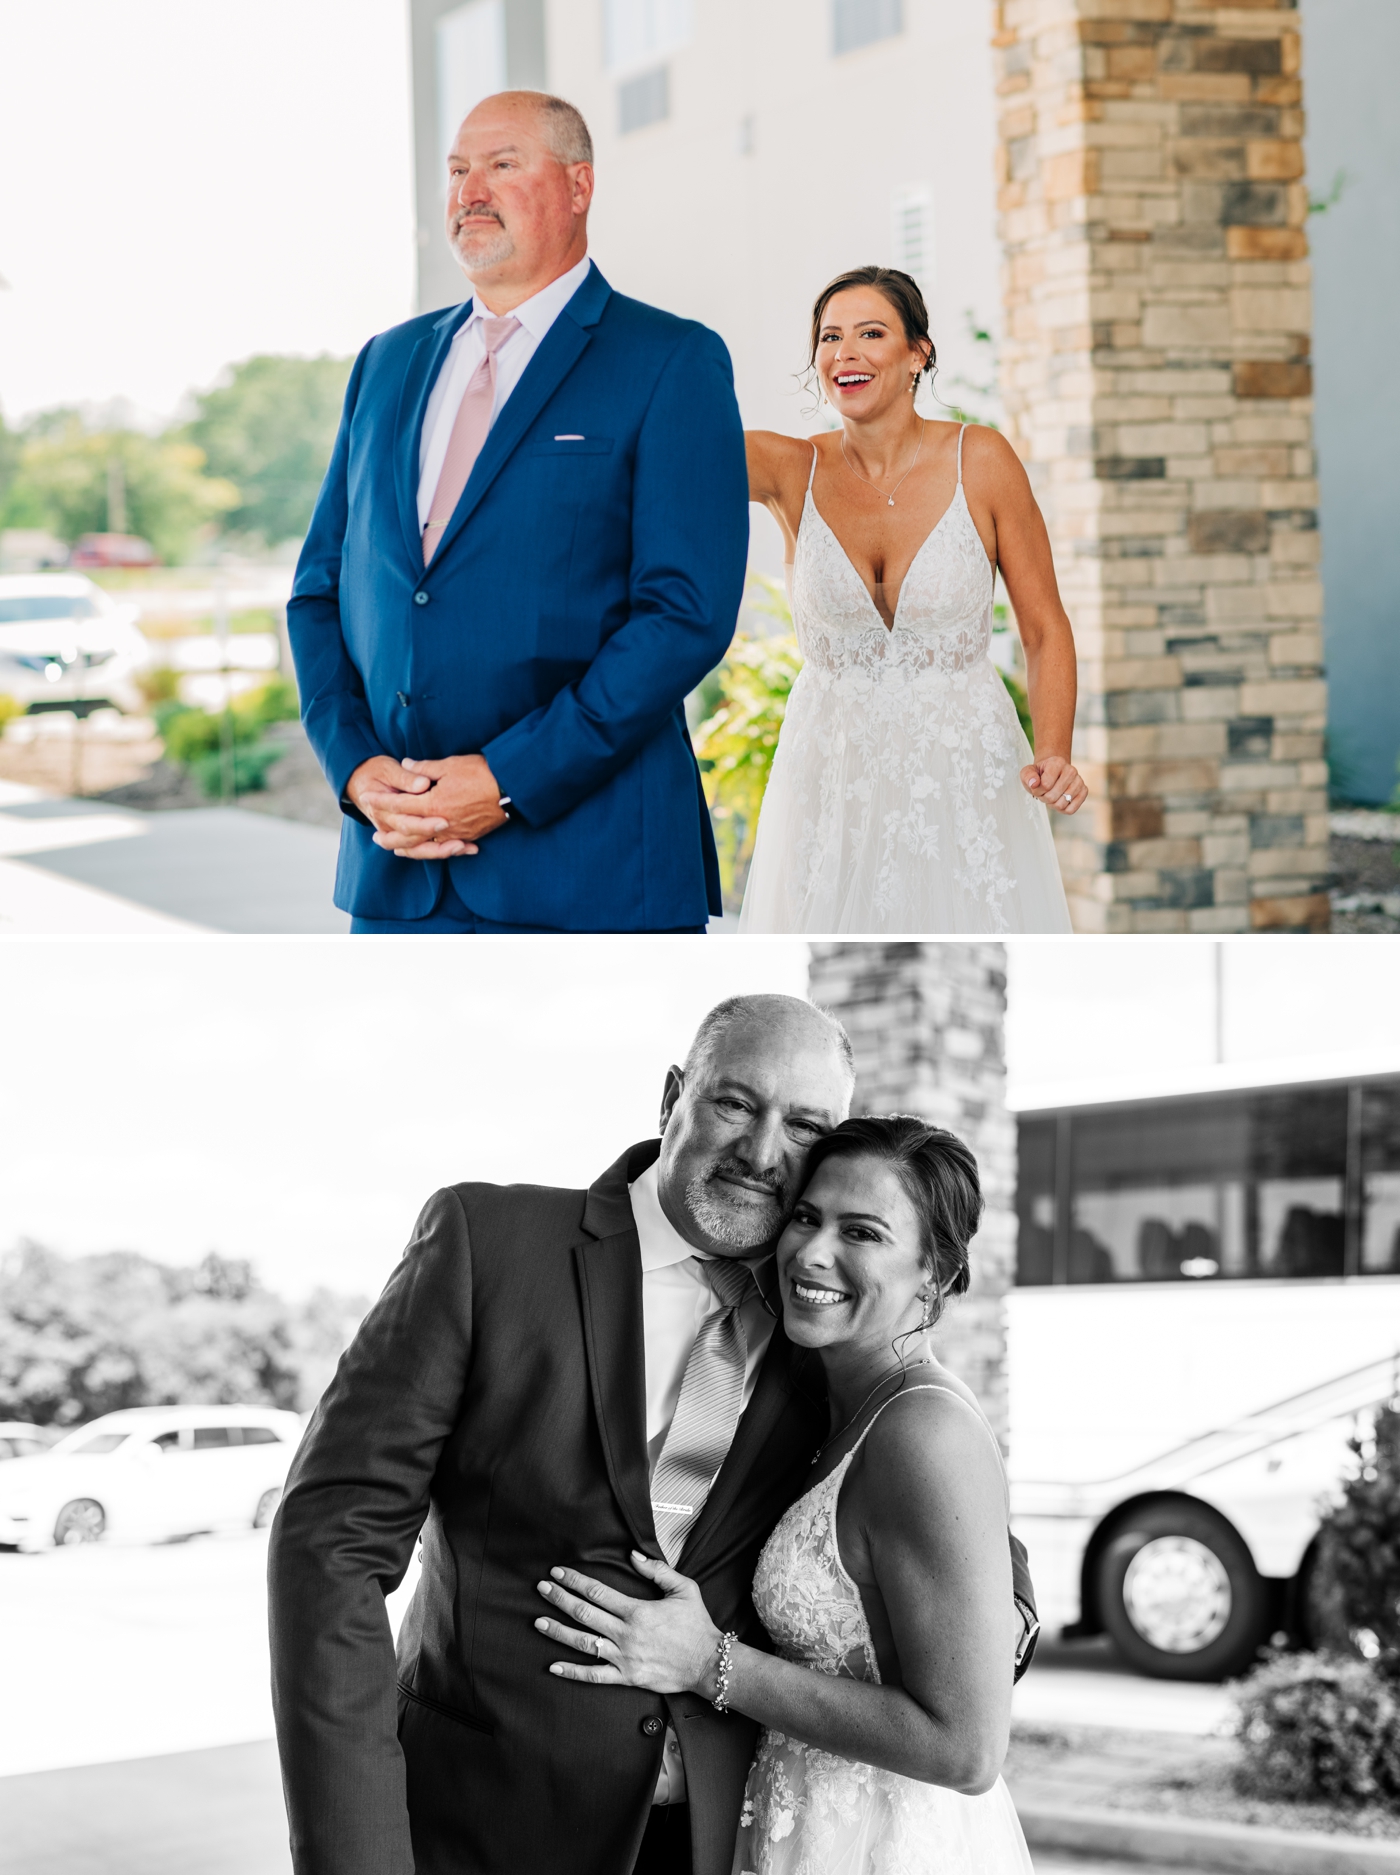 Father Daughter first look Summer wedding in Parkersburg, Illinois